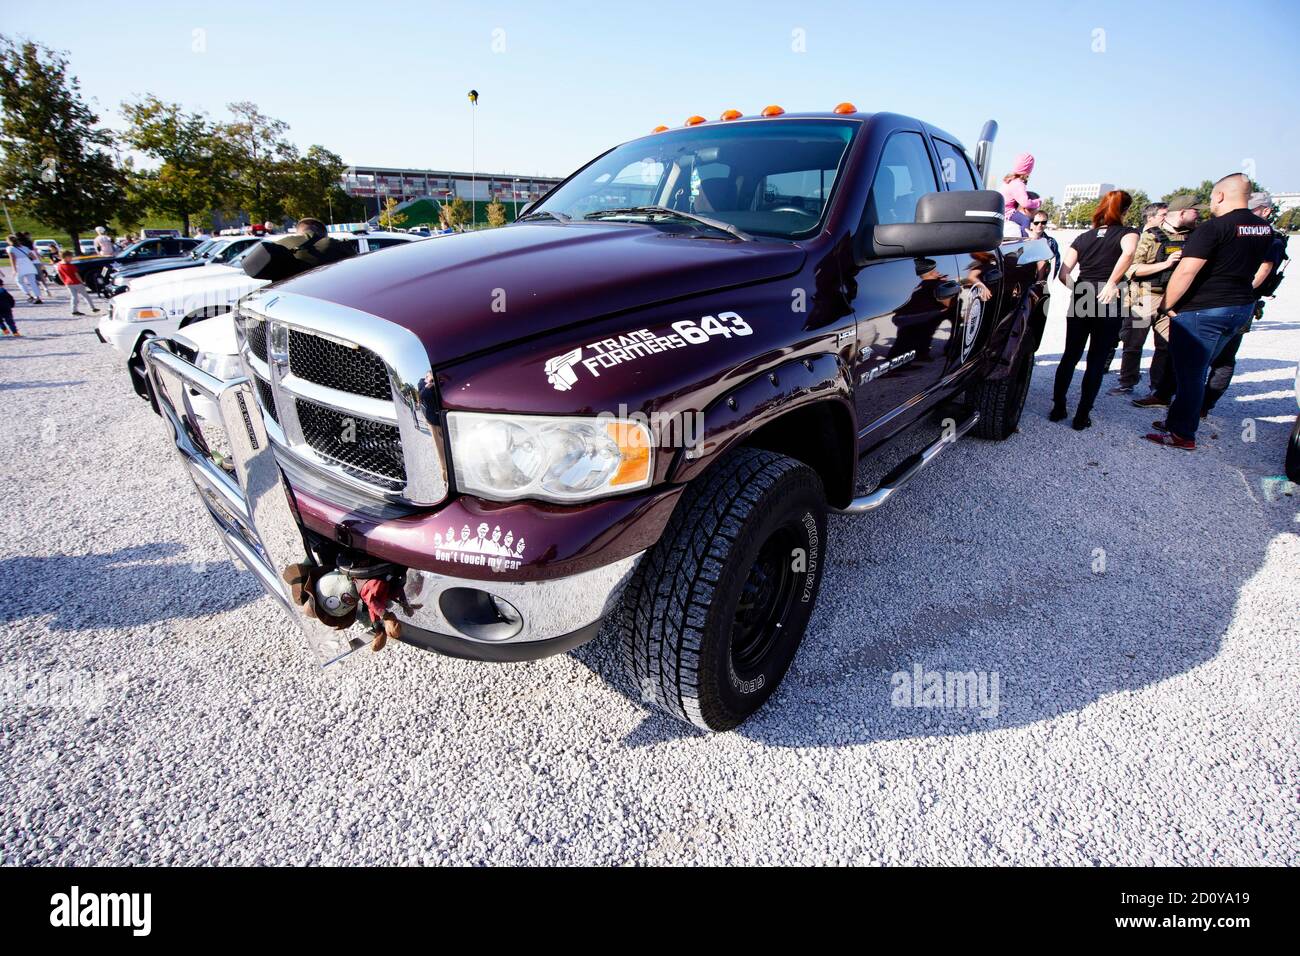 Warsaw, Pl. 03rd Oct, 2020. A Dodge Ram is seen during the American Police  Car Parade in Warsaw, Poland on October 3, 2020. On Saturday in  enthousiasts gathered with their American police